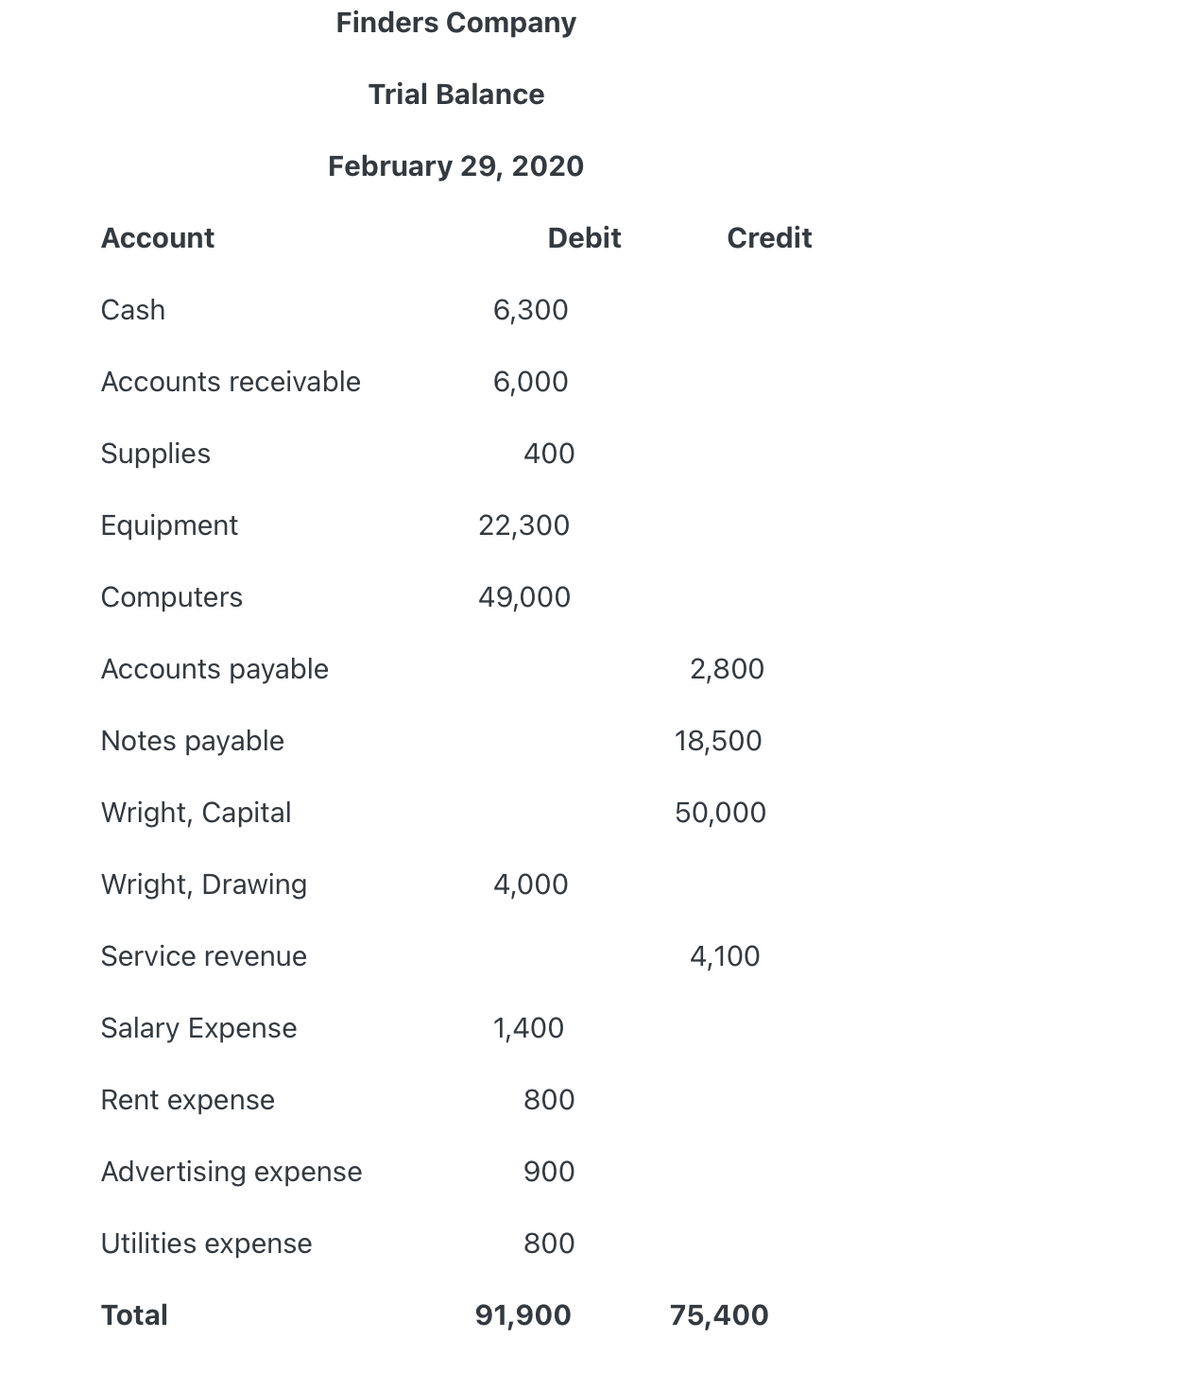 Finders Company
Trial Balance
February 29, 2020
Account
Debit
Credit
Cash
6,300
Accounts receivable
6,000
Supplies
400
Equipment
22,300
Computers
49,000
Accounts payable
2,800
Notes payable
18,500
Wright, Capital
50,000
Wright, Drawing
4,000
Service revenue
4,100
Salary Expense
1,400
Rent expense
800
Advertising expense
900
Utilities expense
800
Total
91,900
75,400
